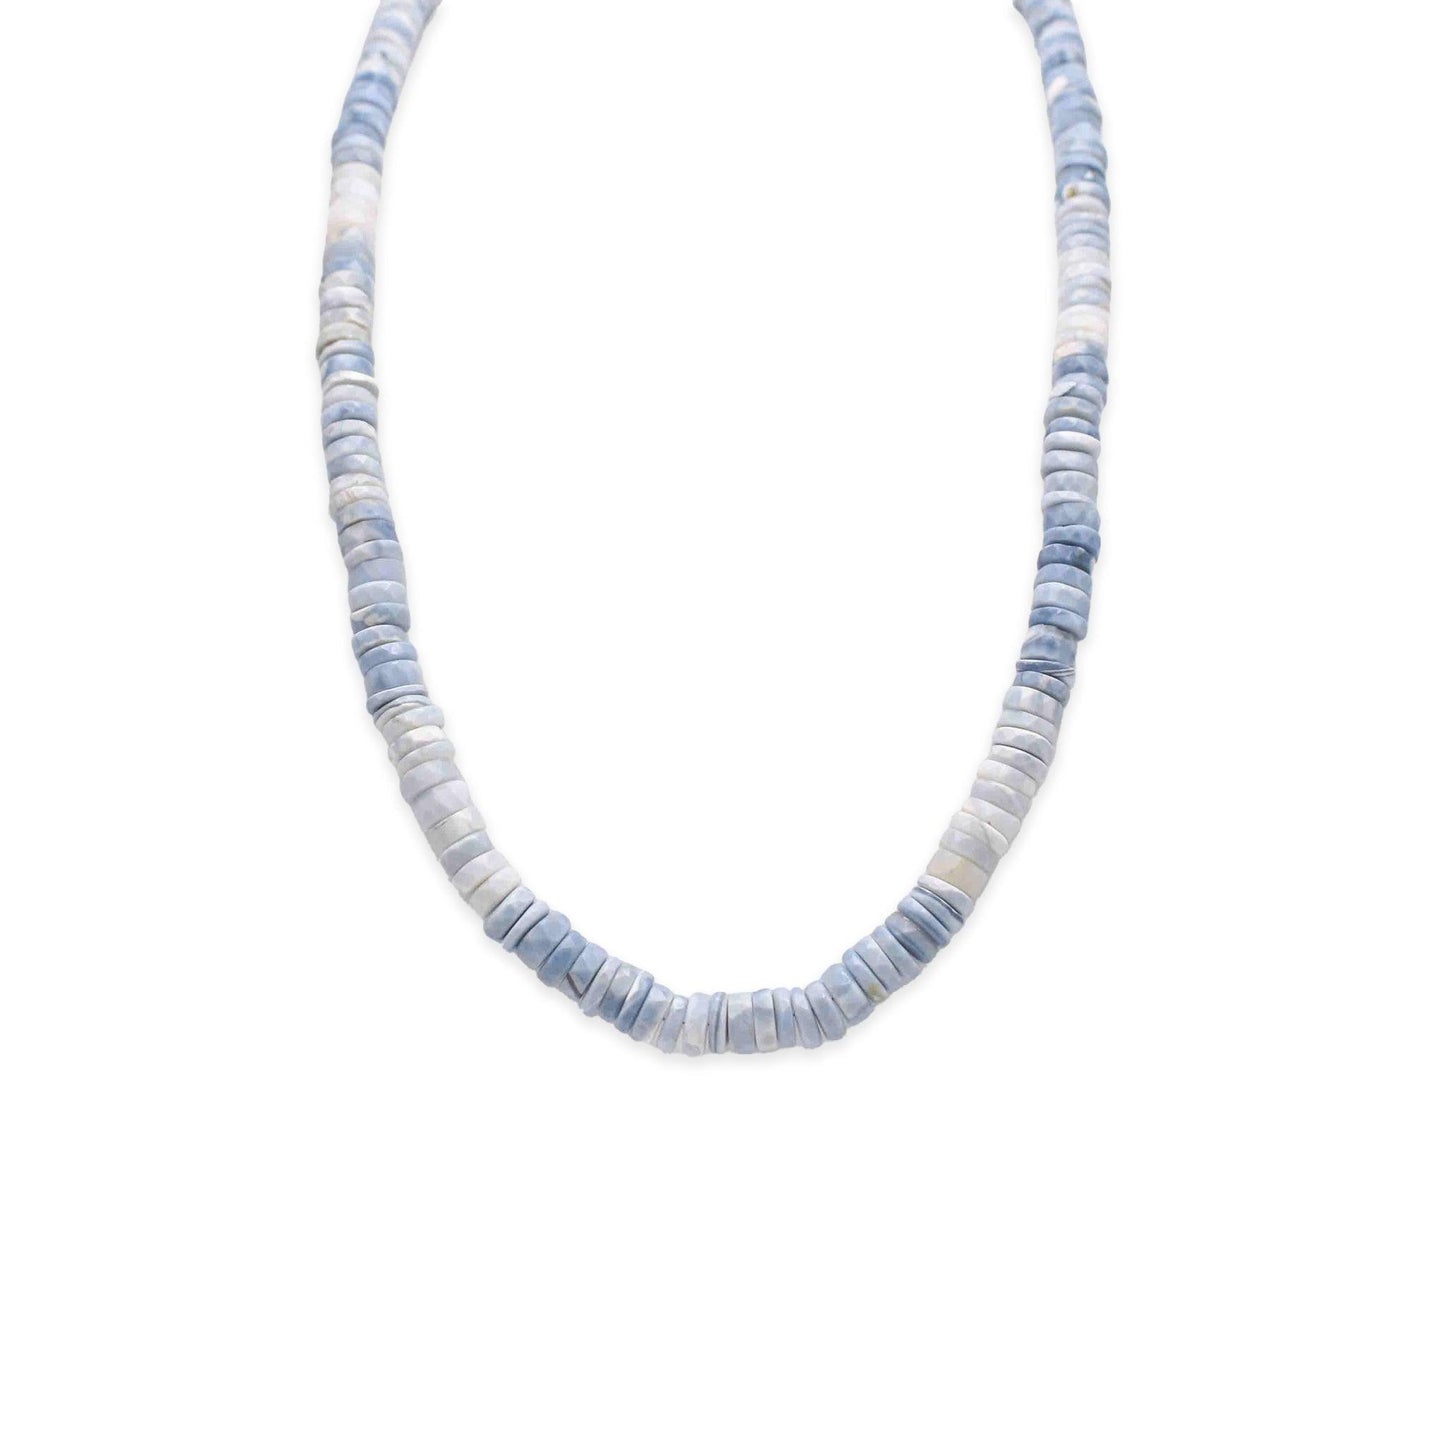 Blue-Opal-Faceted-Cut-Stone-Necklace